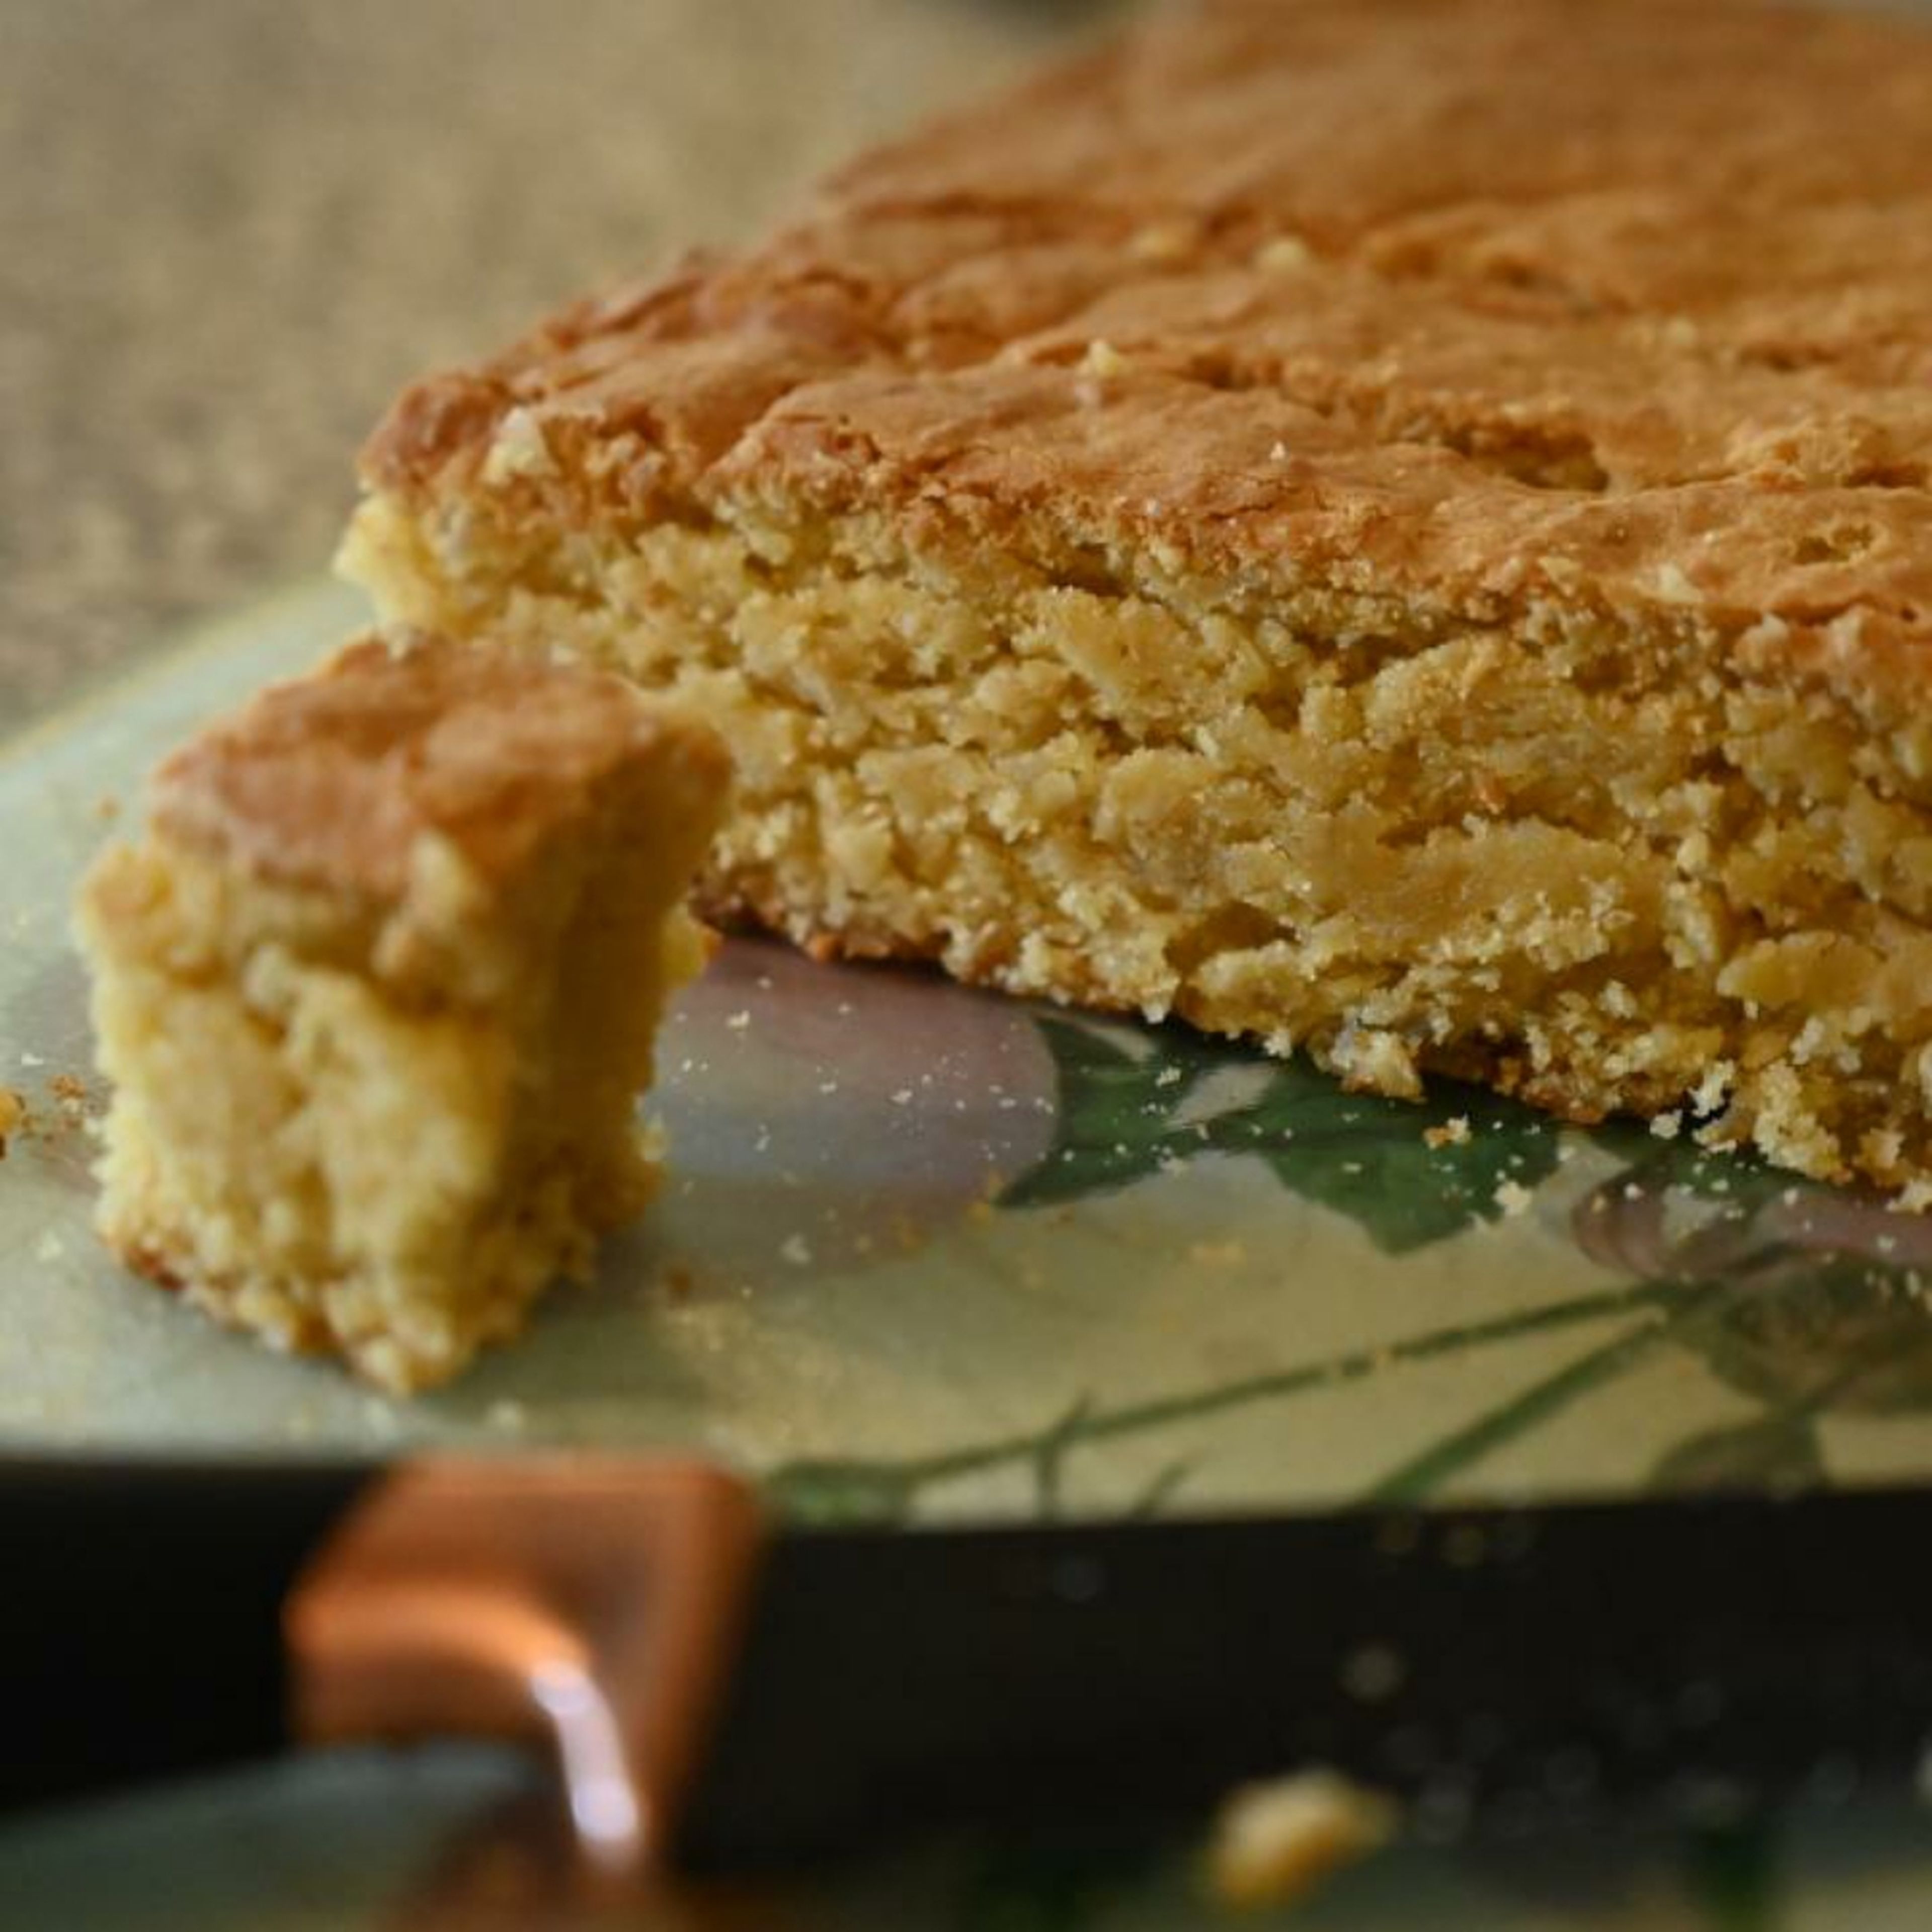 Remove the cake from the baking tray and place on a clean board and cut the cake into desired sizes, 